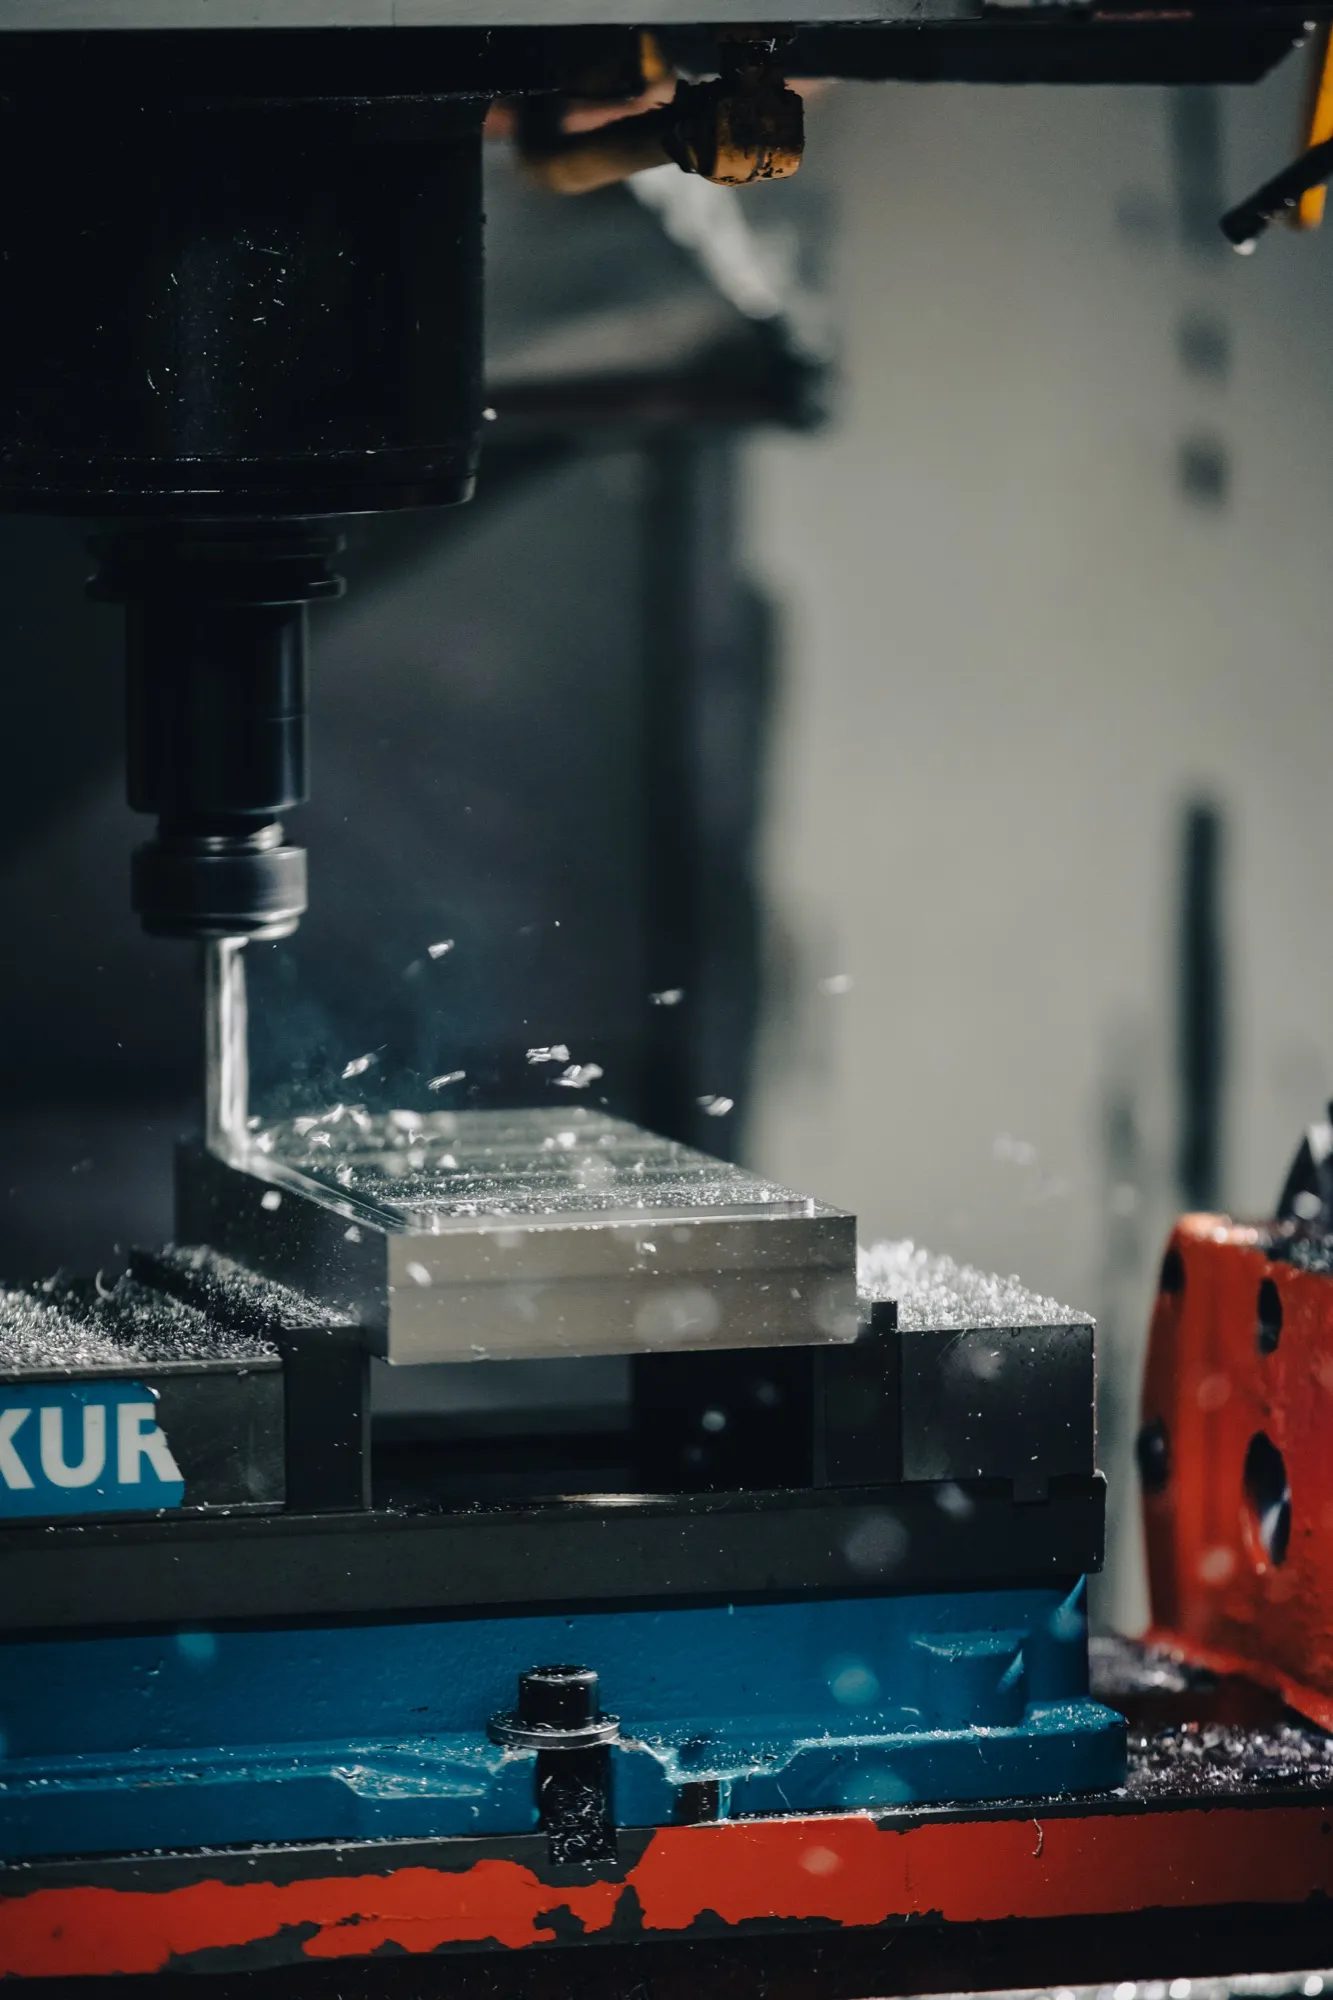 machining equipment carving into a metal block and metal shavings being thrown around it